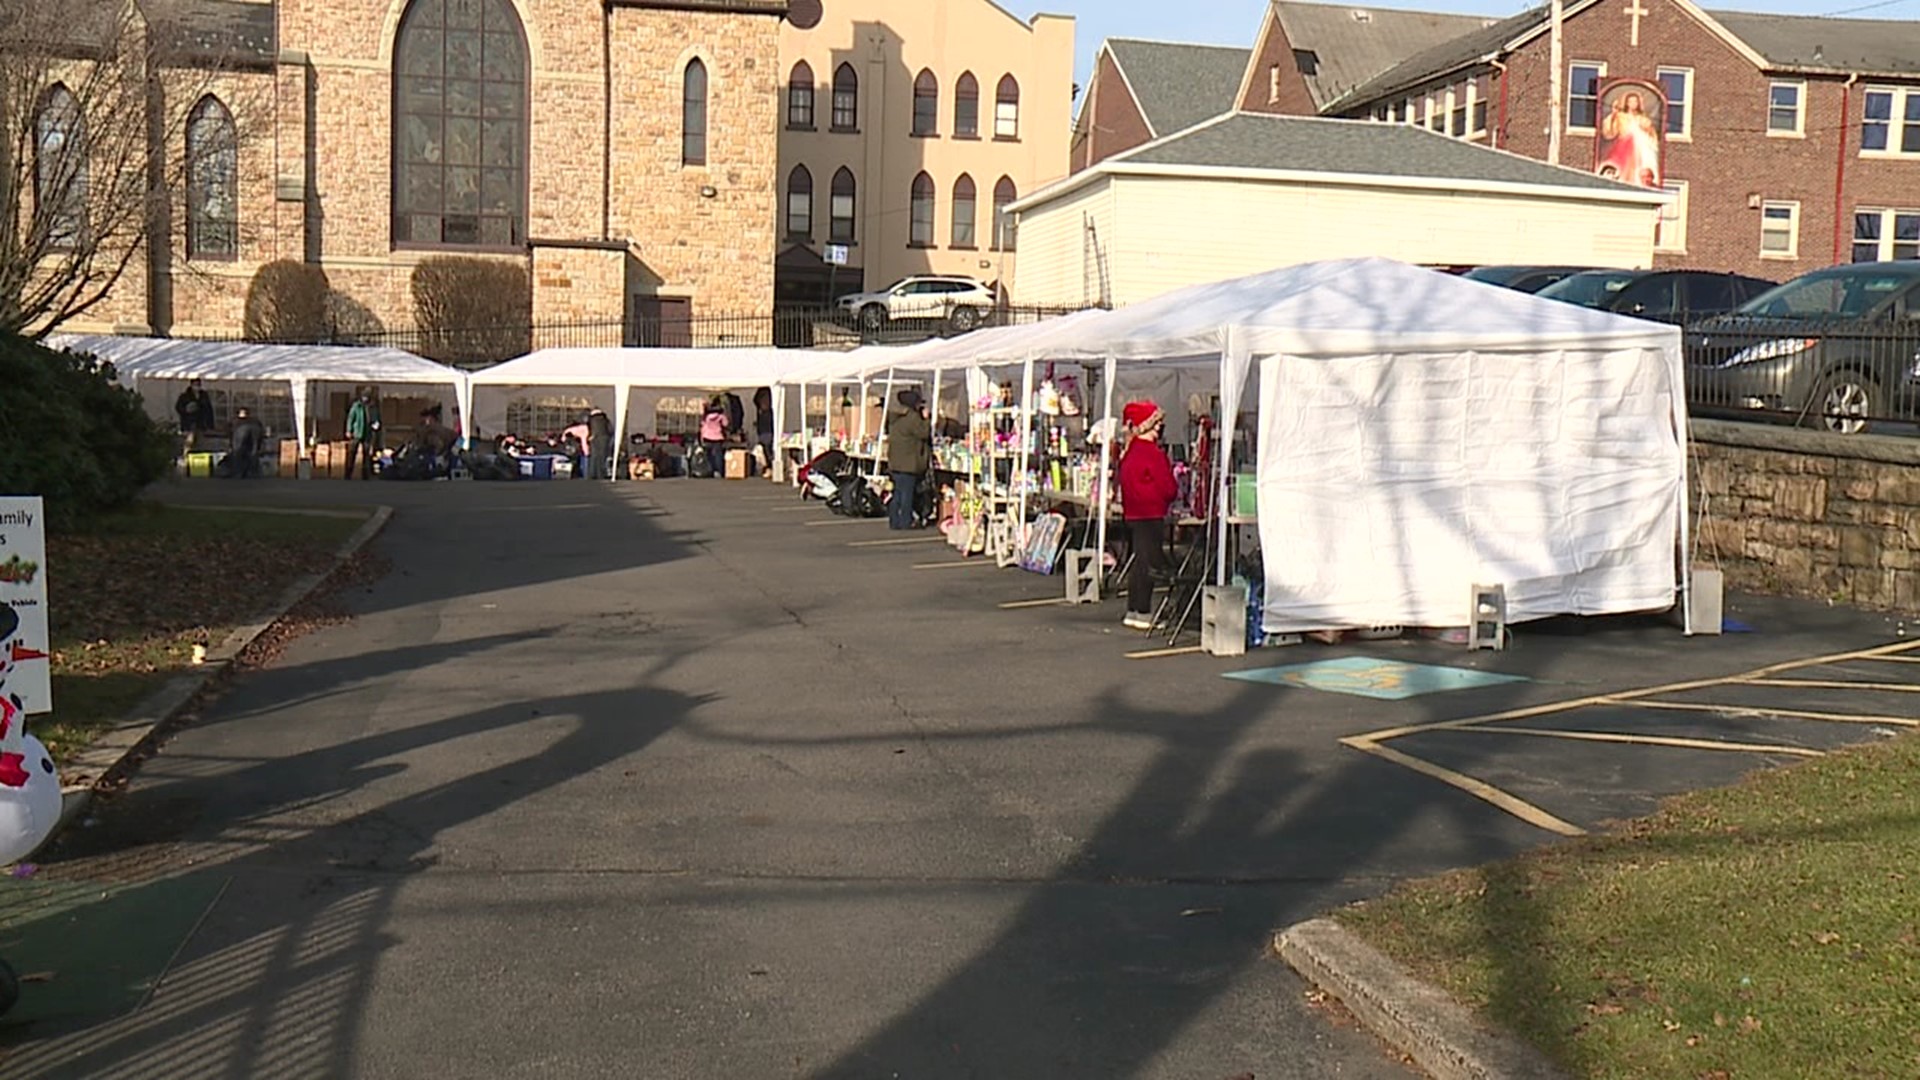 A charity in Scranton is making sure hundreds of parents feel a child's joy on Christmas morning.